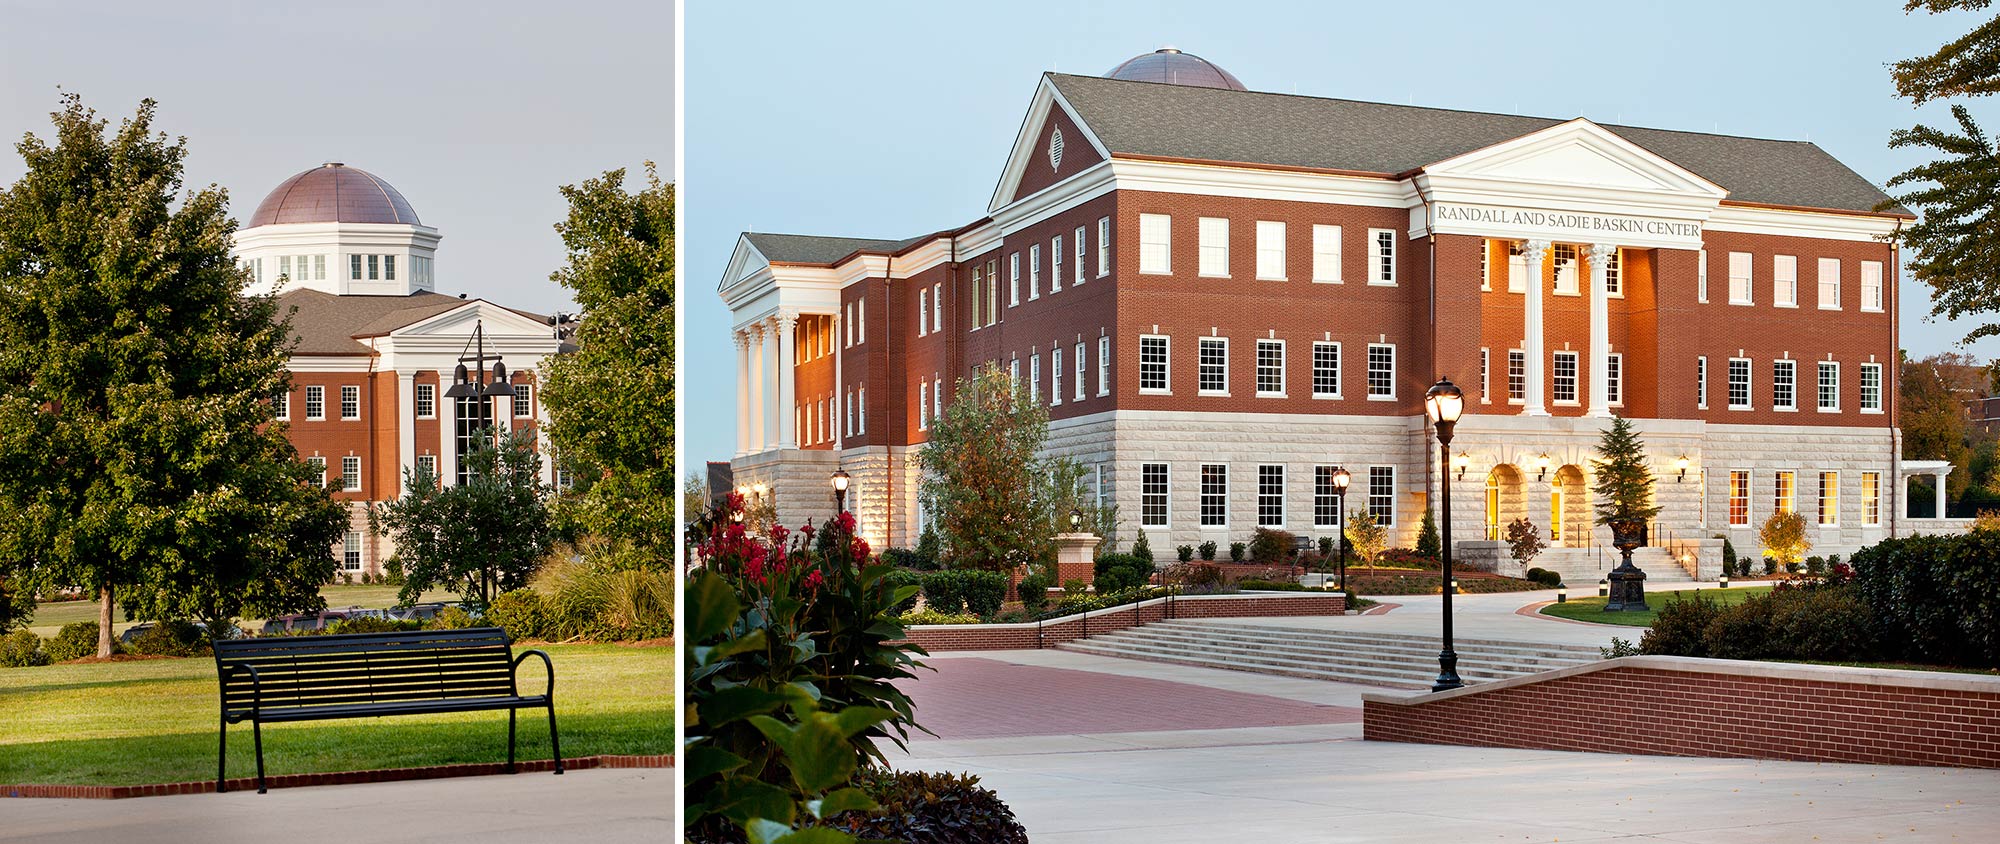 Belmont University Randall and Sadie Baskin Center-College of Law